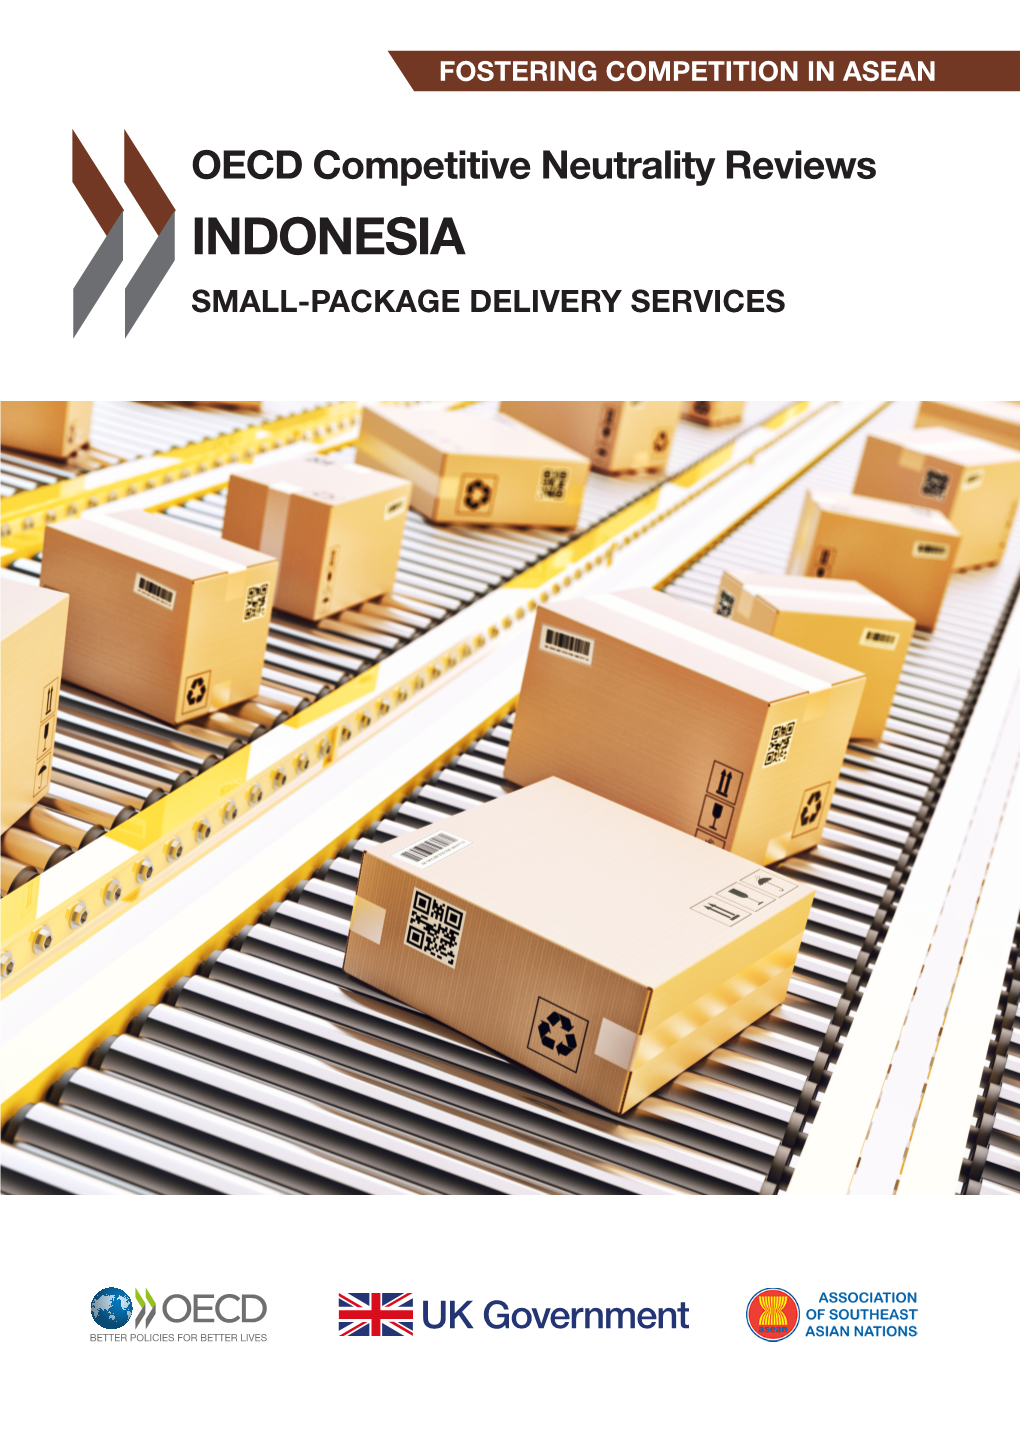 Indonesia Small-Package Delivery Services